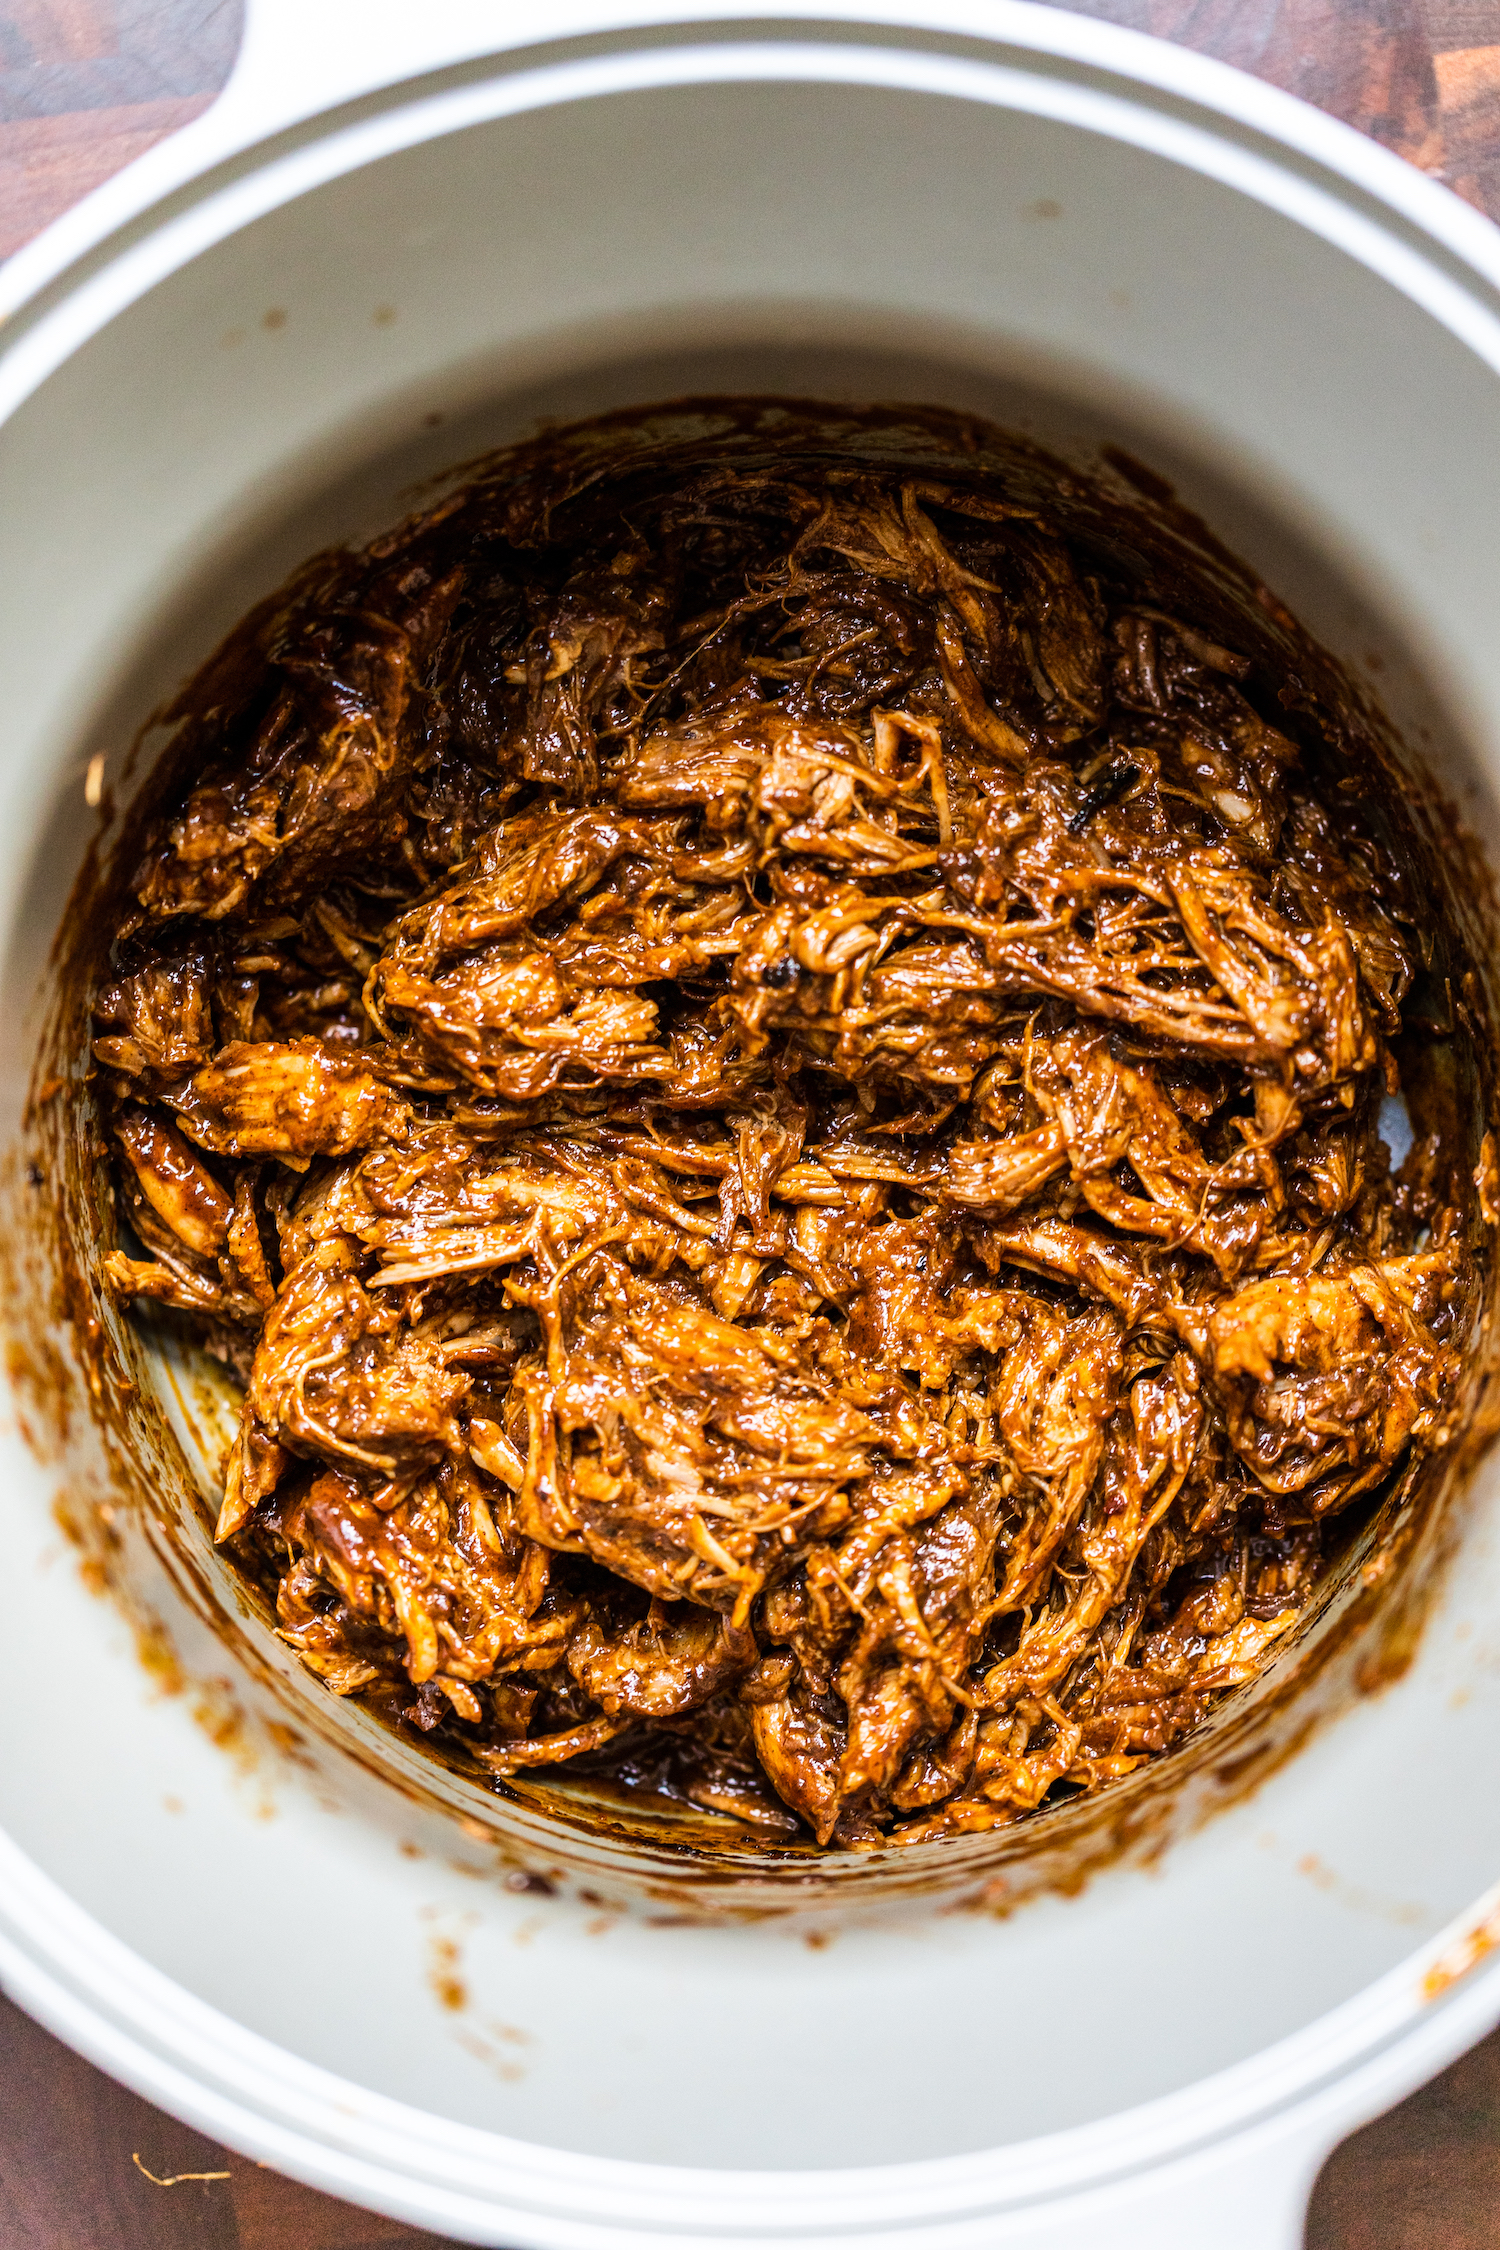 Smoky pulled pork in a slow cooker on a wooden board